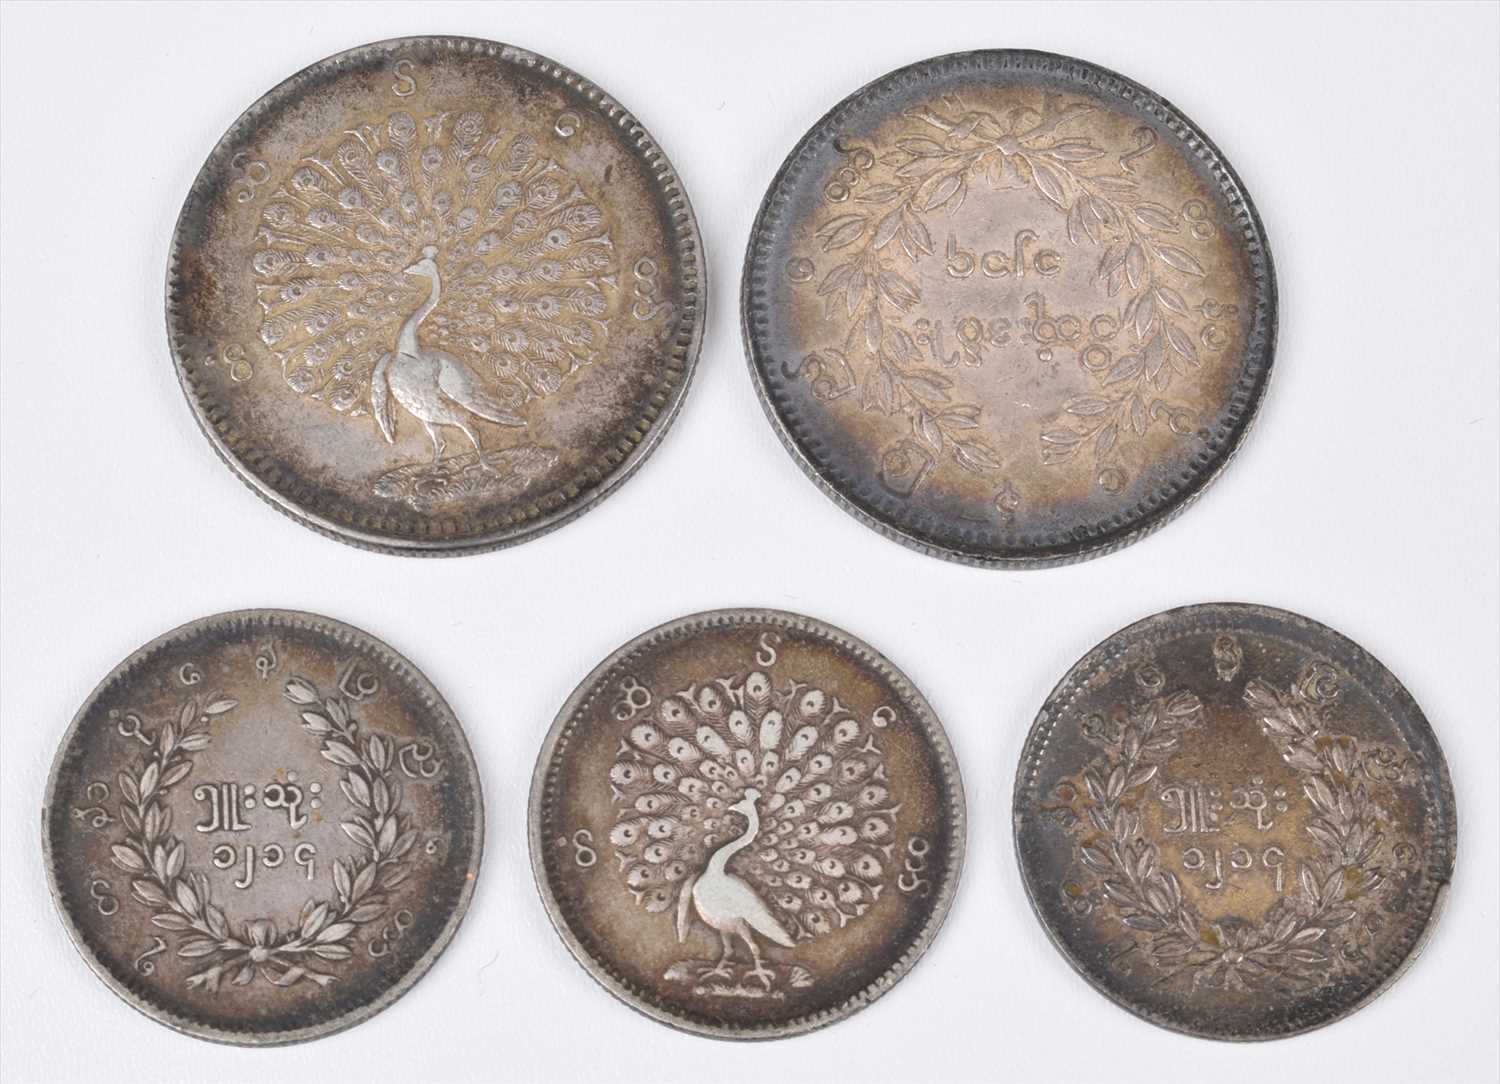 Lot 2 - Two Burmese silver Kyat (1 Rupee) coins and three Burmese silver 5 Mu (1/2 Rupee) coins (5).